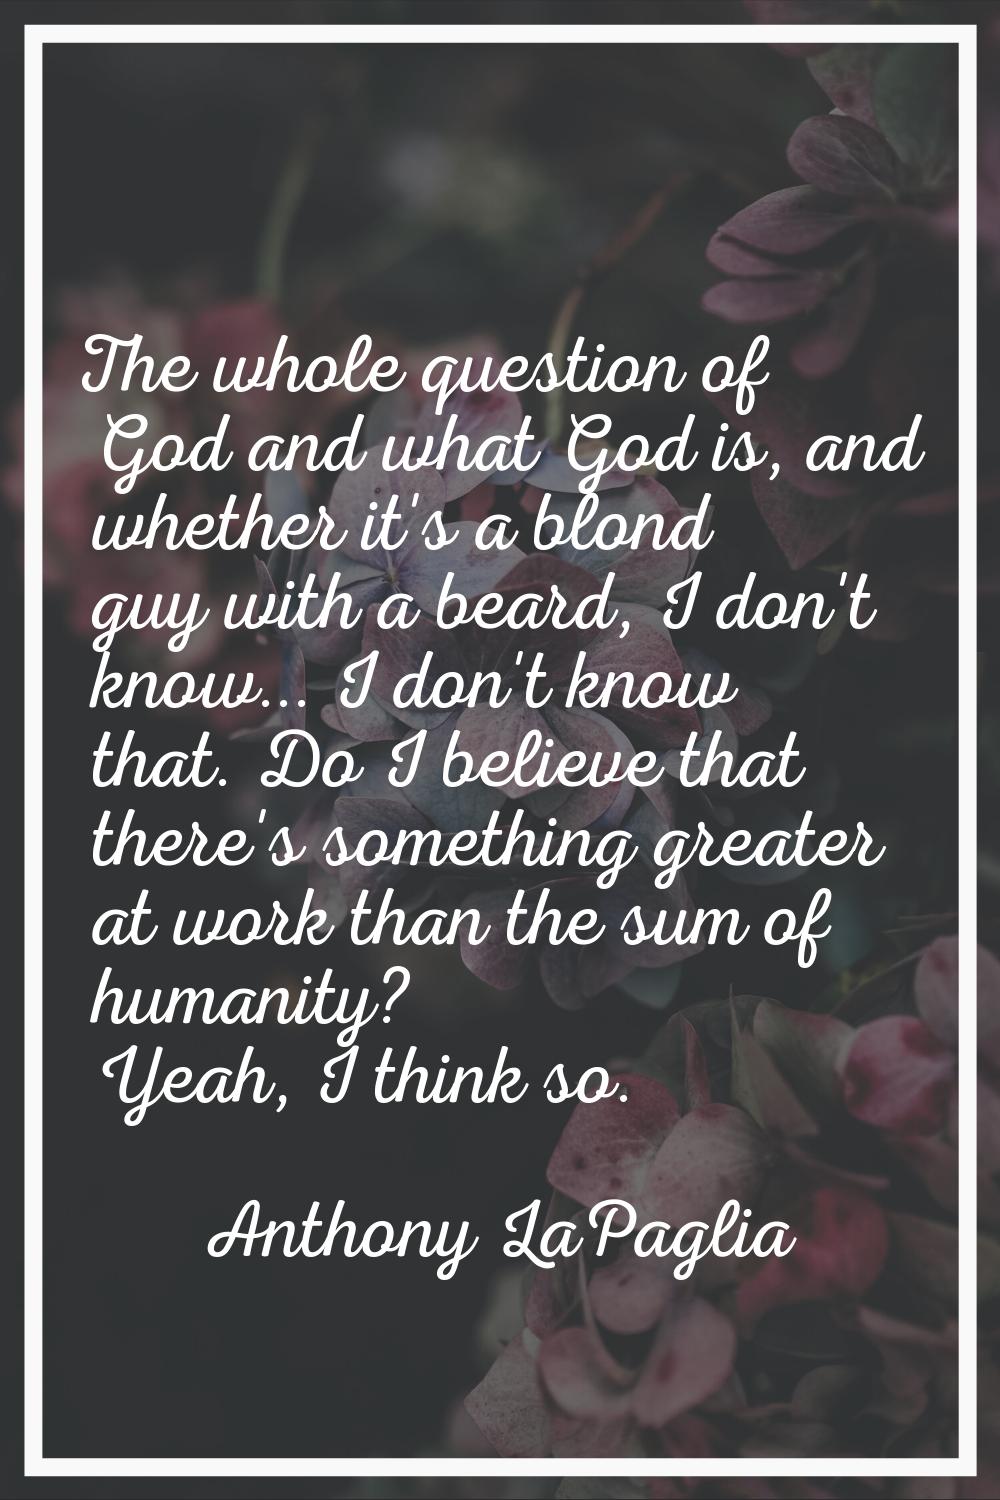 The whole question of God and what God is, and whether it's a blond guy with a beard, I don't know.